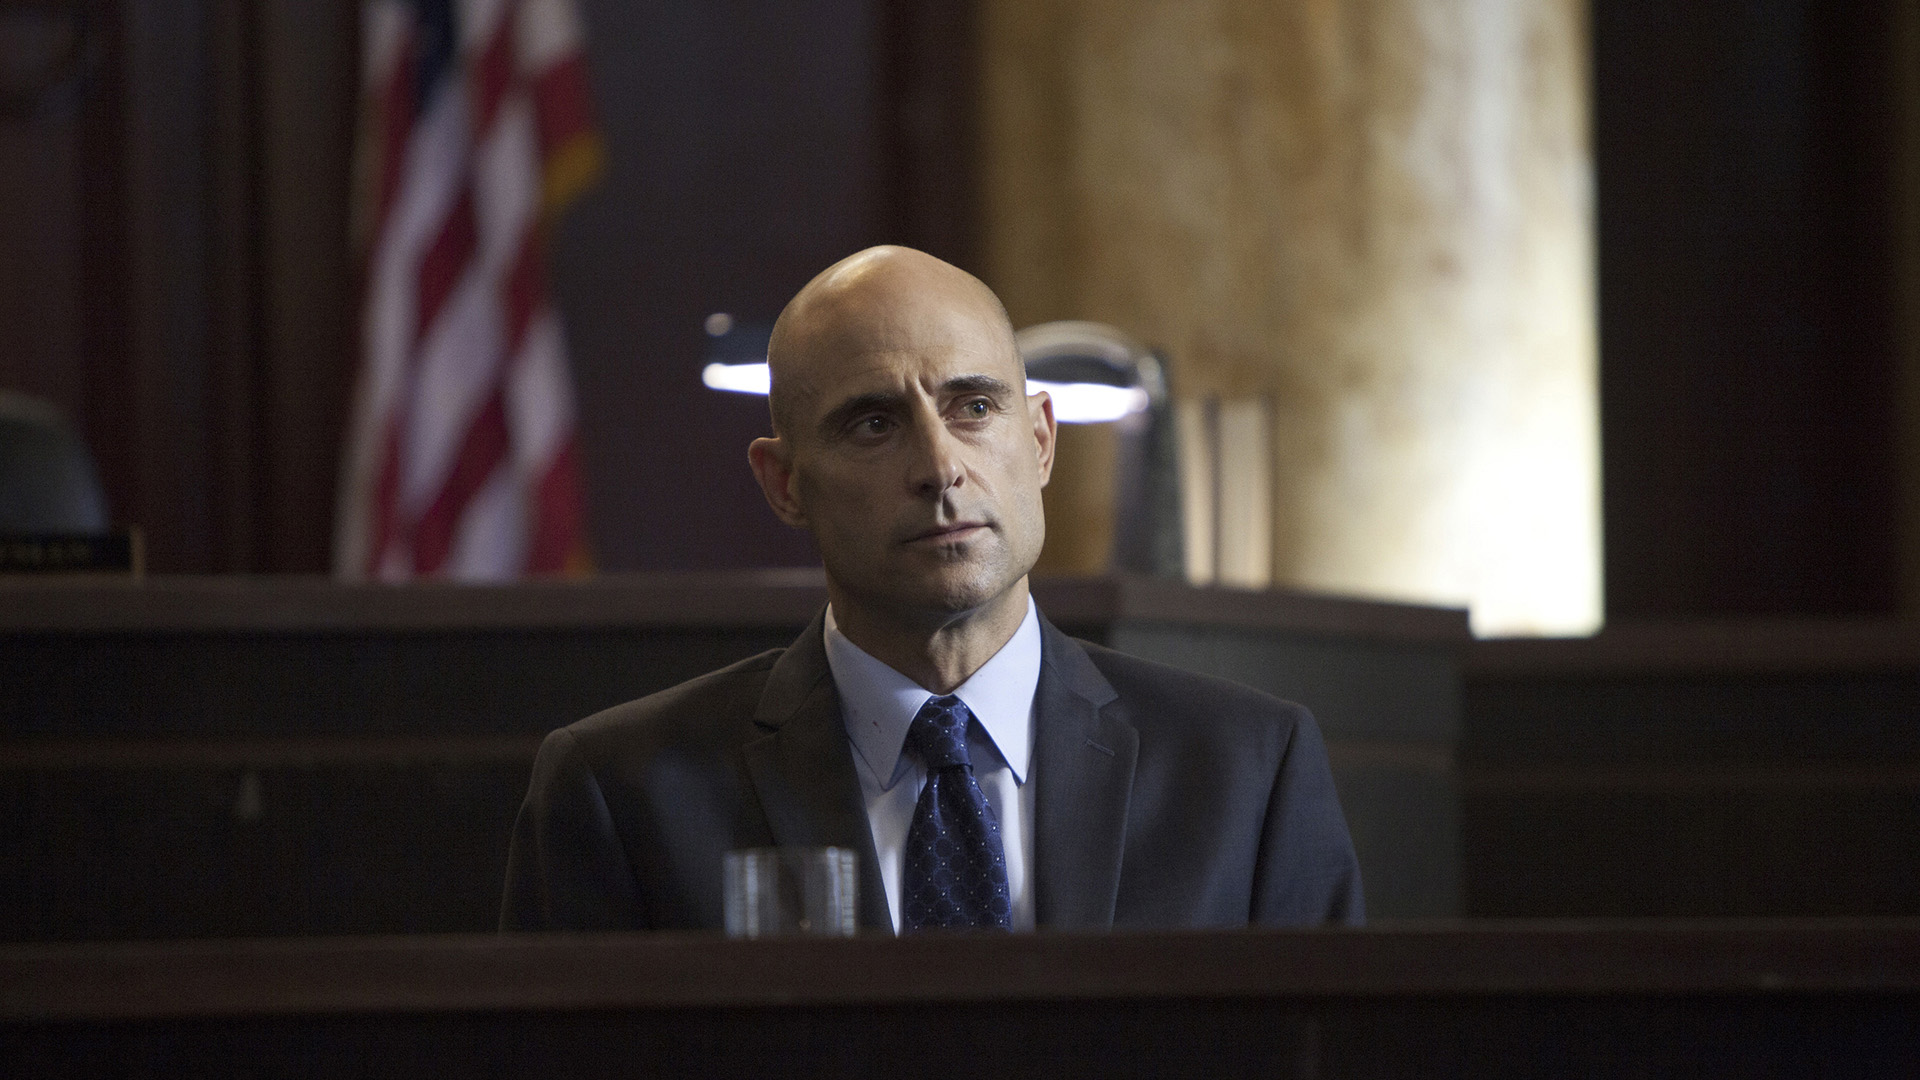 Revelations, Frank has to testify in court., TV-14, Season 1002338, Episode 8